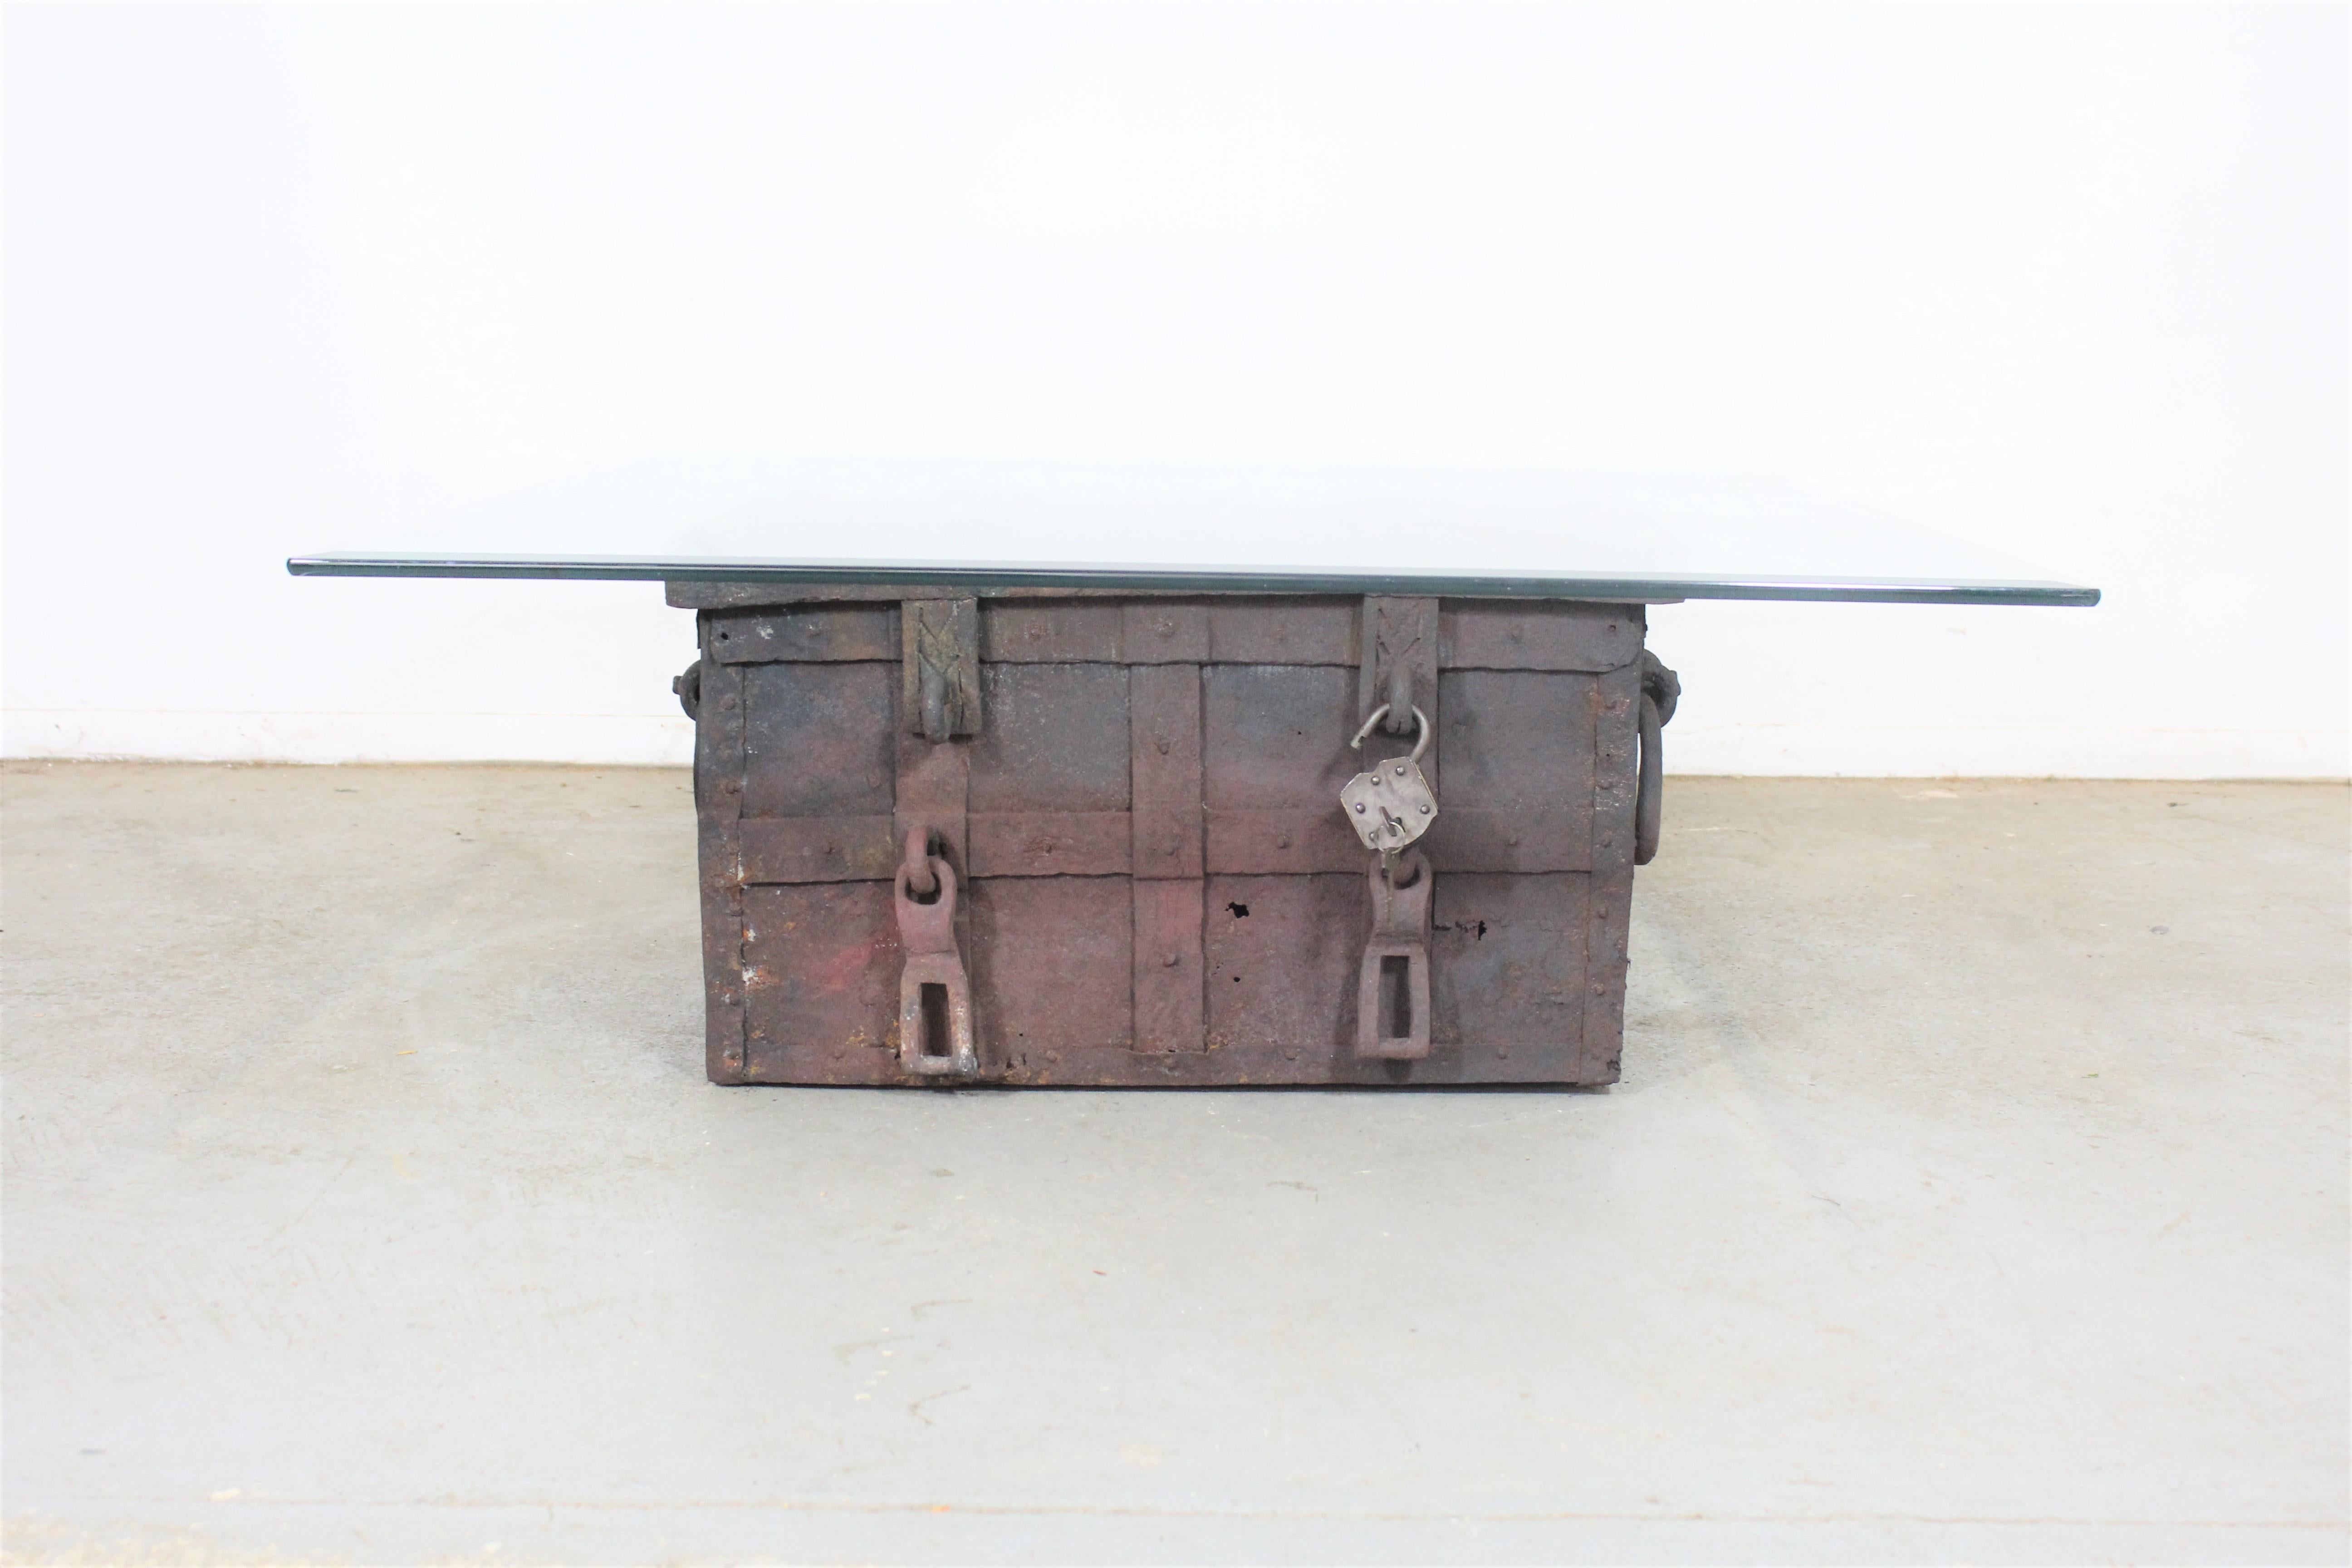 Amazing find. Here we have an antique treasure chest/iron strongbox that can double as a coffee table. Offered in this listing is the iron strongbox itself with the removable glass topping. The chest contains a till inside which is bent and has some